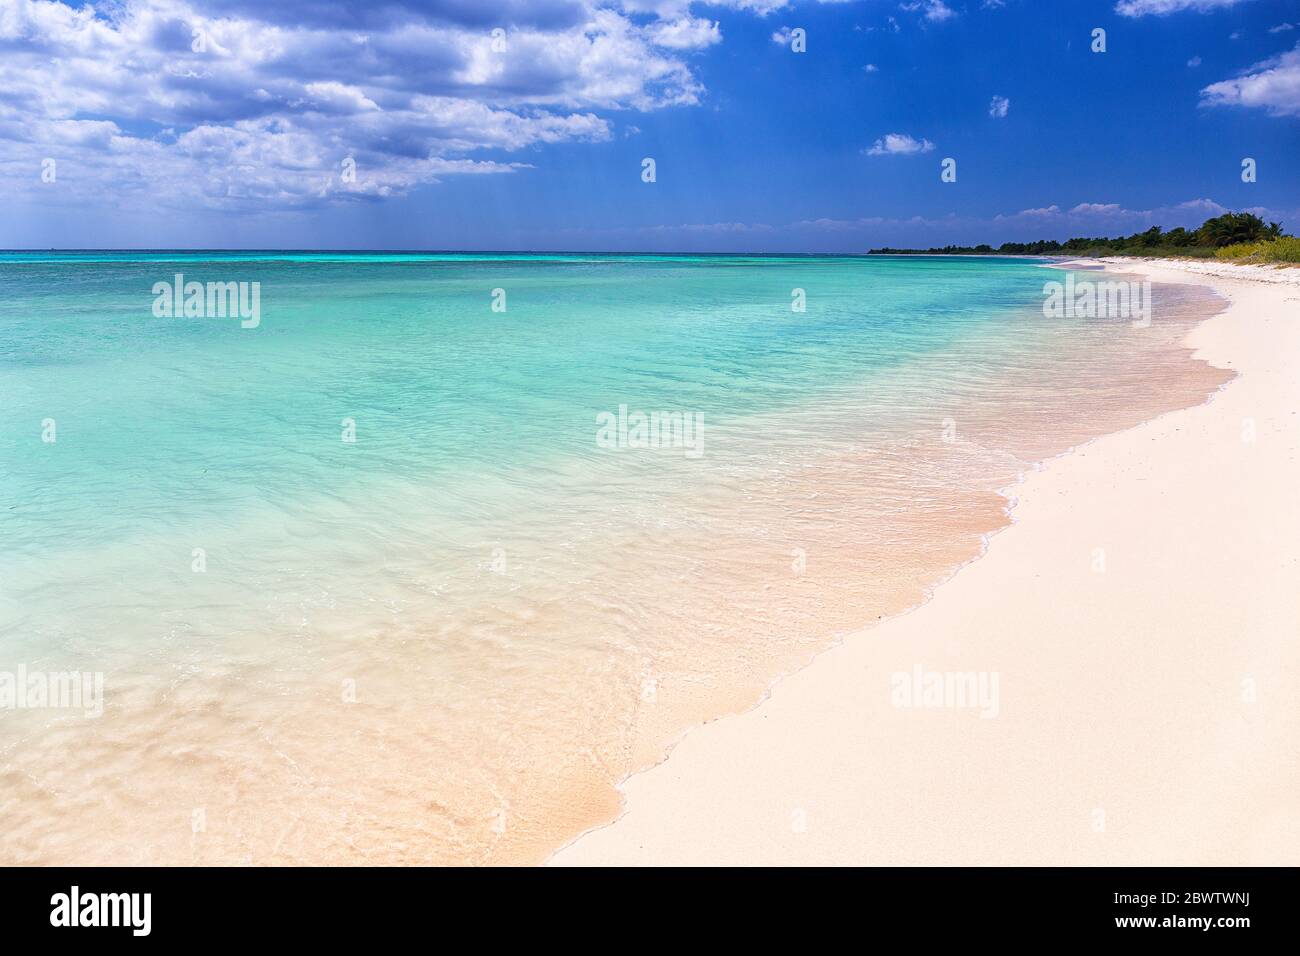 Scenic view of beach against sky at Punta Sur, Cozumel, Mexico Stock Photo